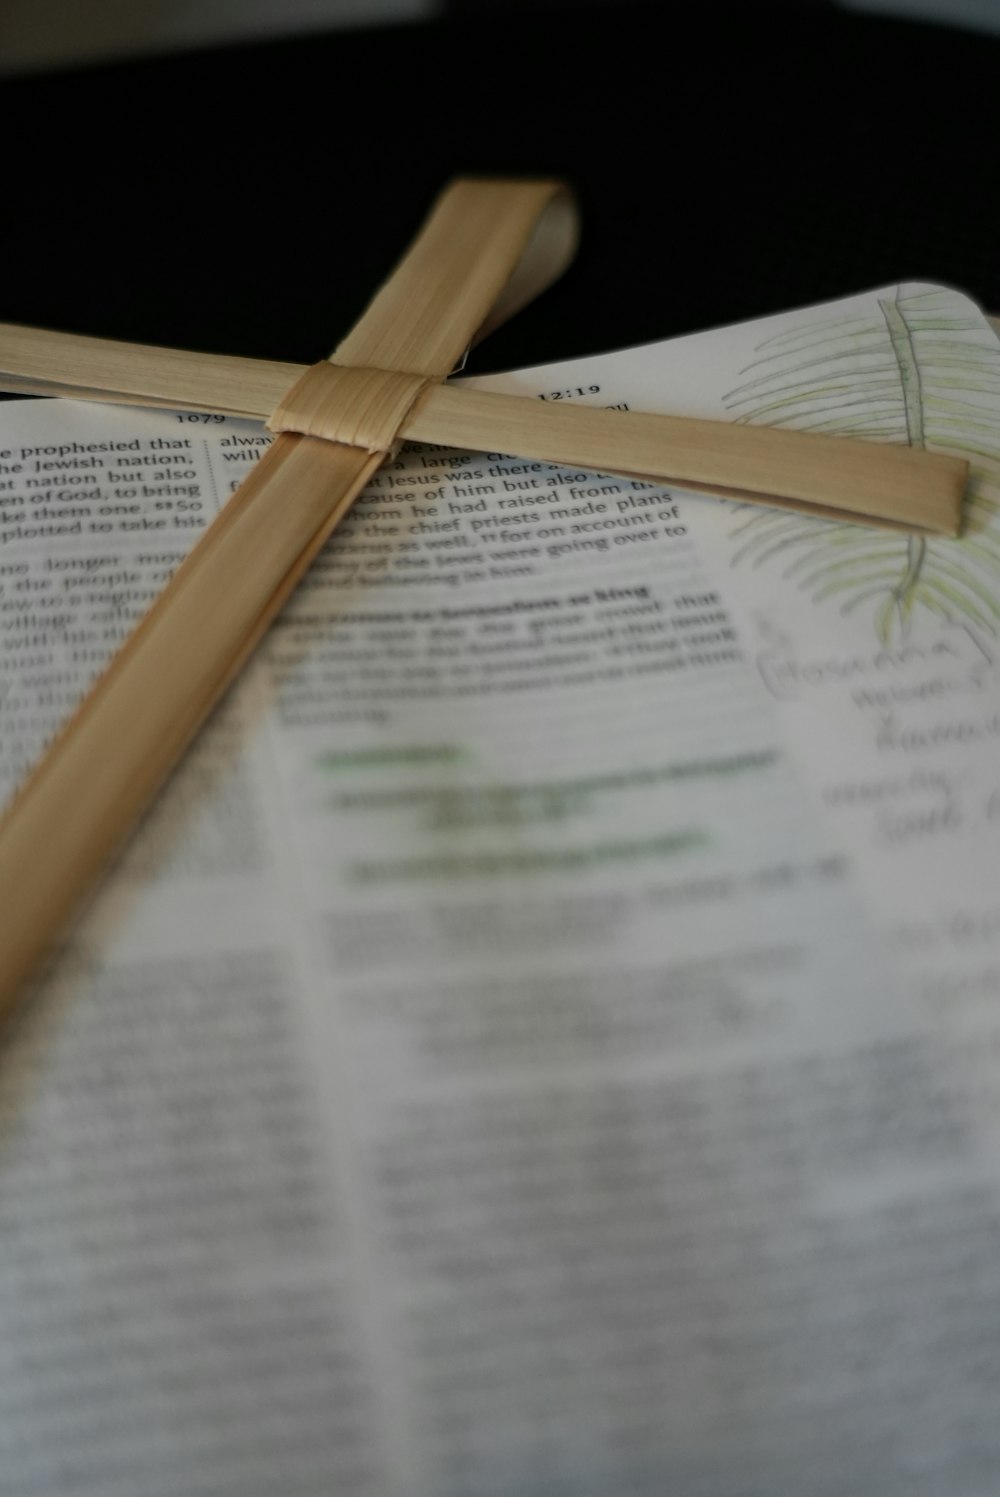 a wooden cross laying on top of an open book